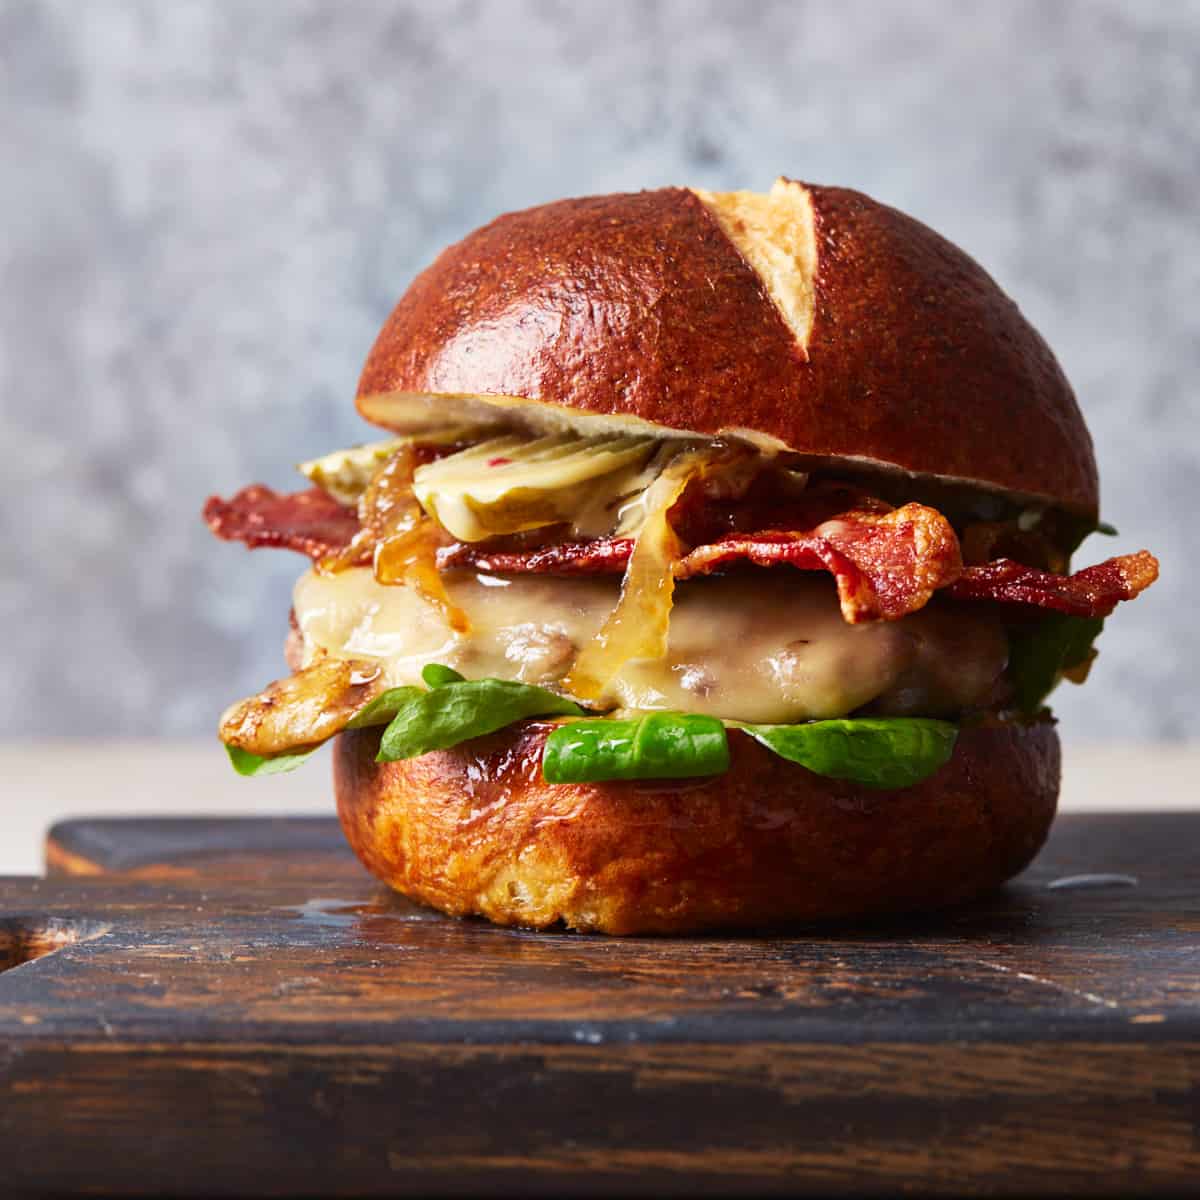 Pub-Style Pretzel Burger with Bacon - Also The Crumbs Please